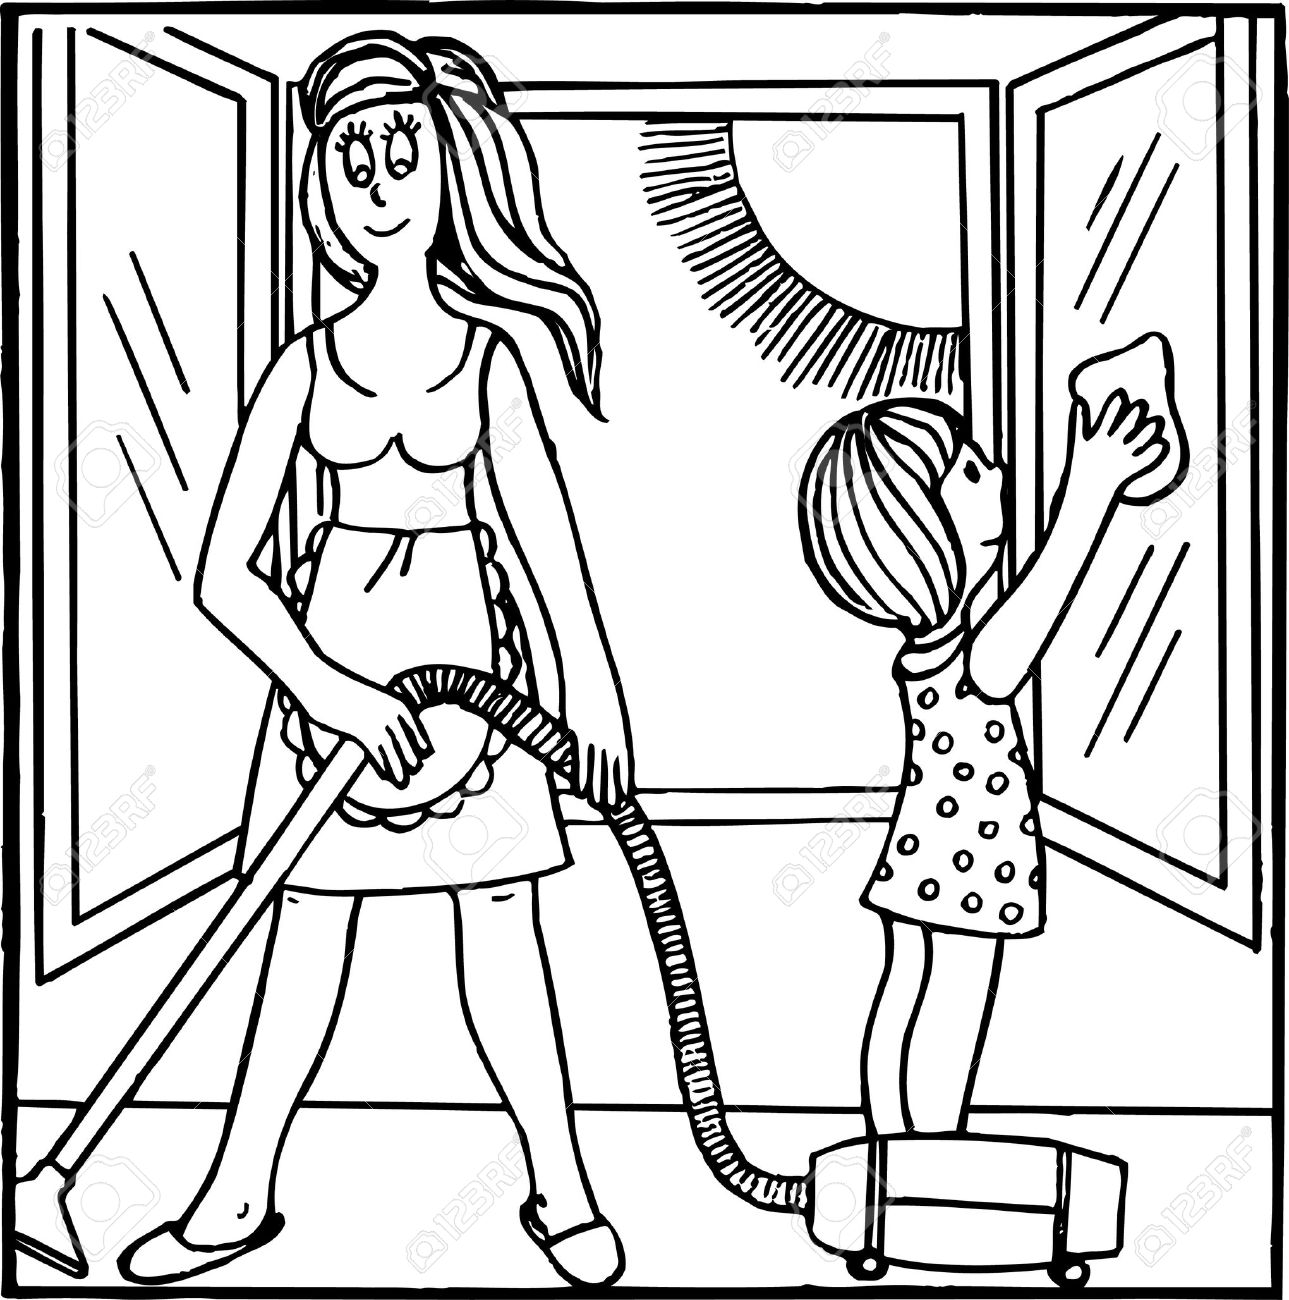 Cleaning the house clipart black and white